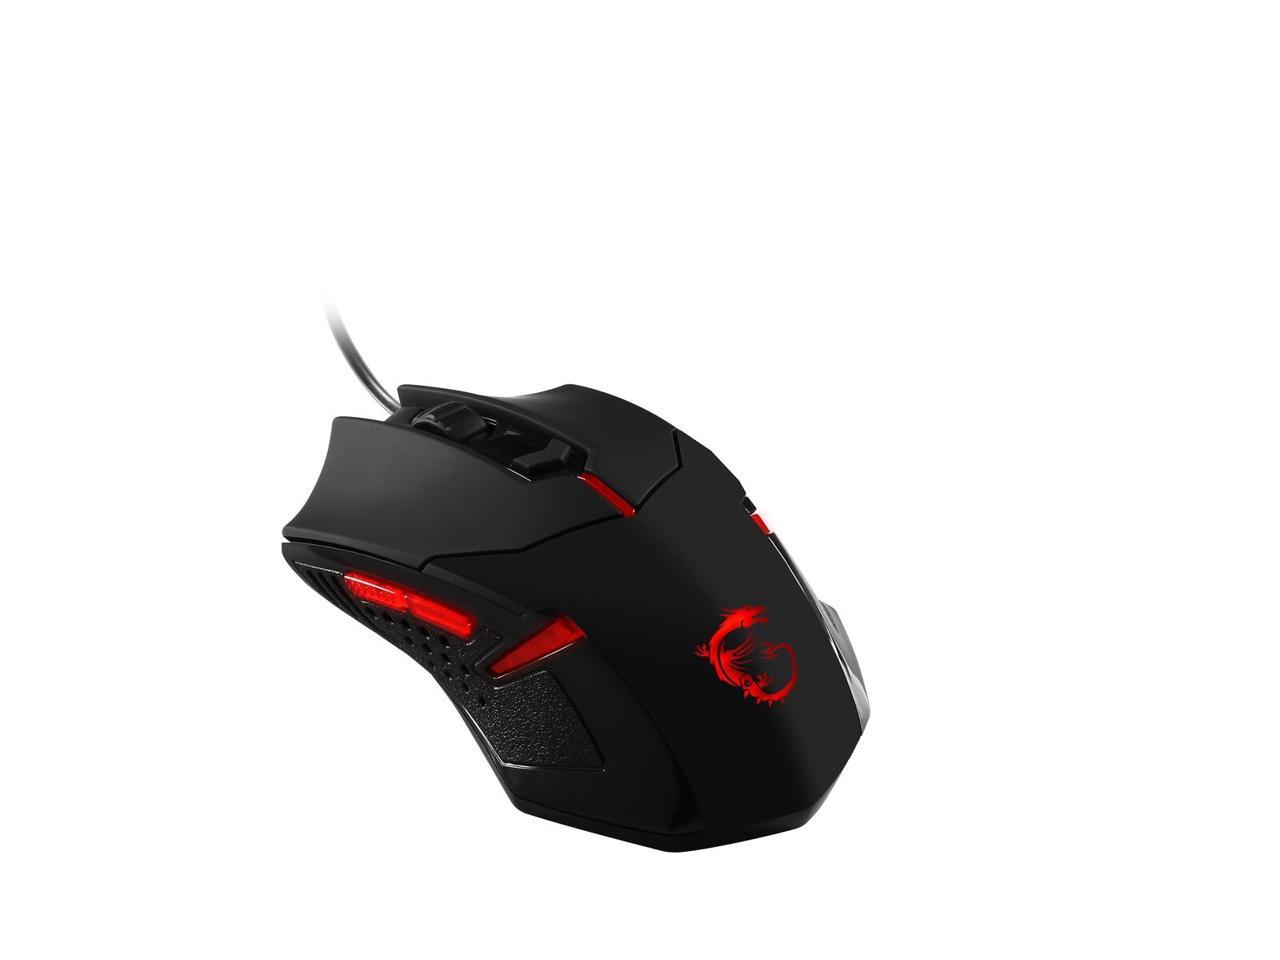 interceptor ds b1 gaming mouse driver